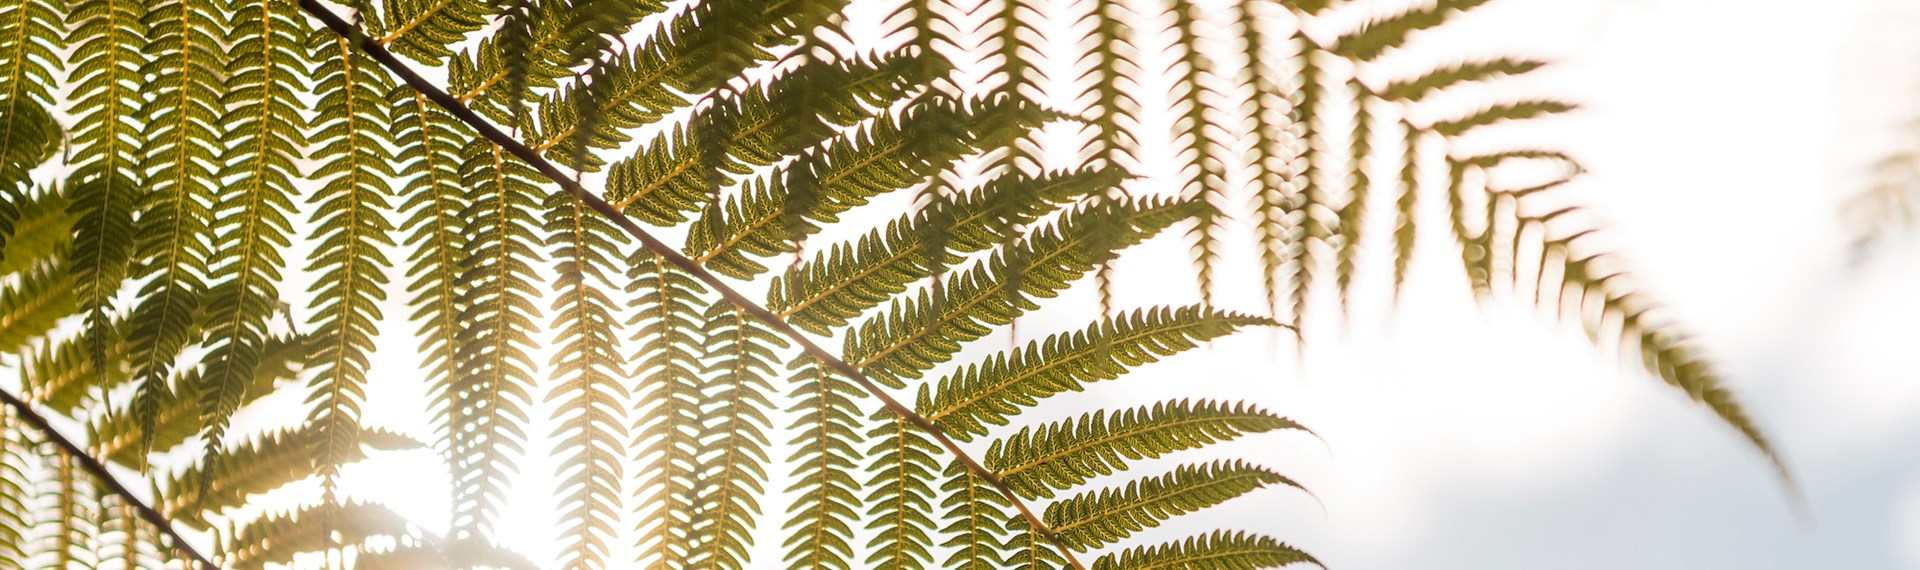 Punga fern fronds close up against the sun, in the Marlborough Sounds at the top of New Zealand's South Island.